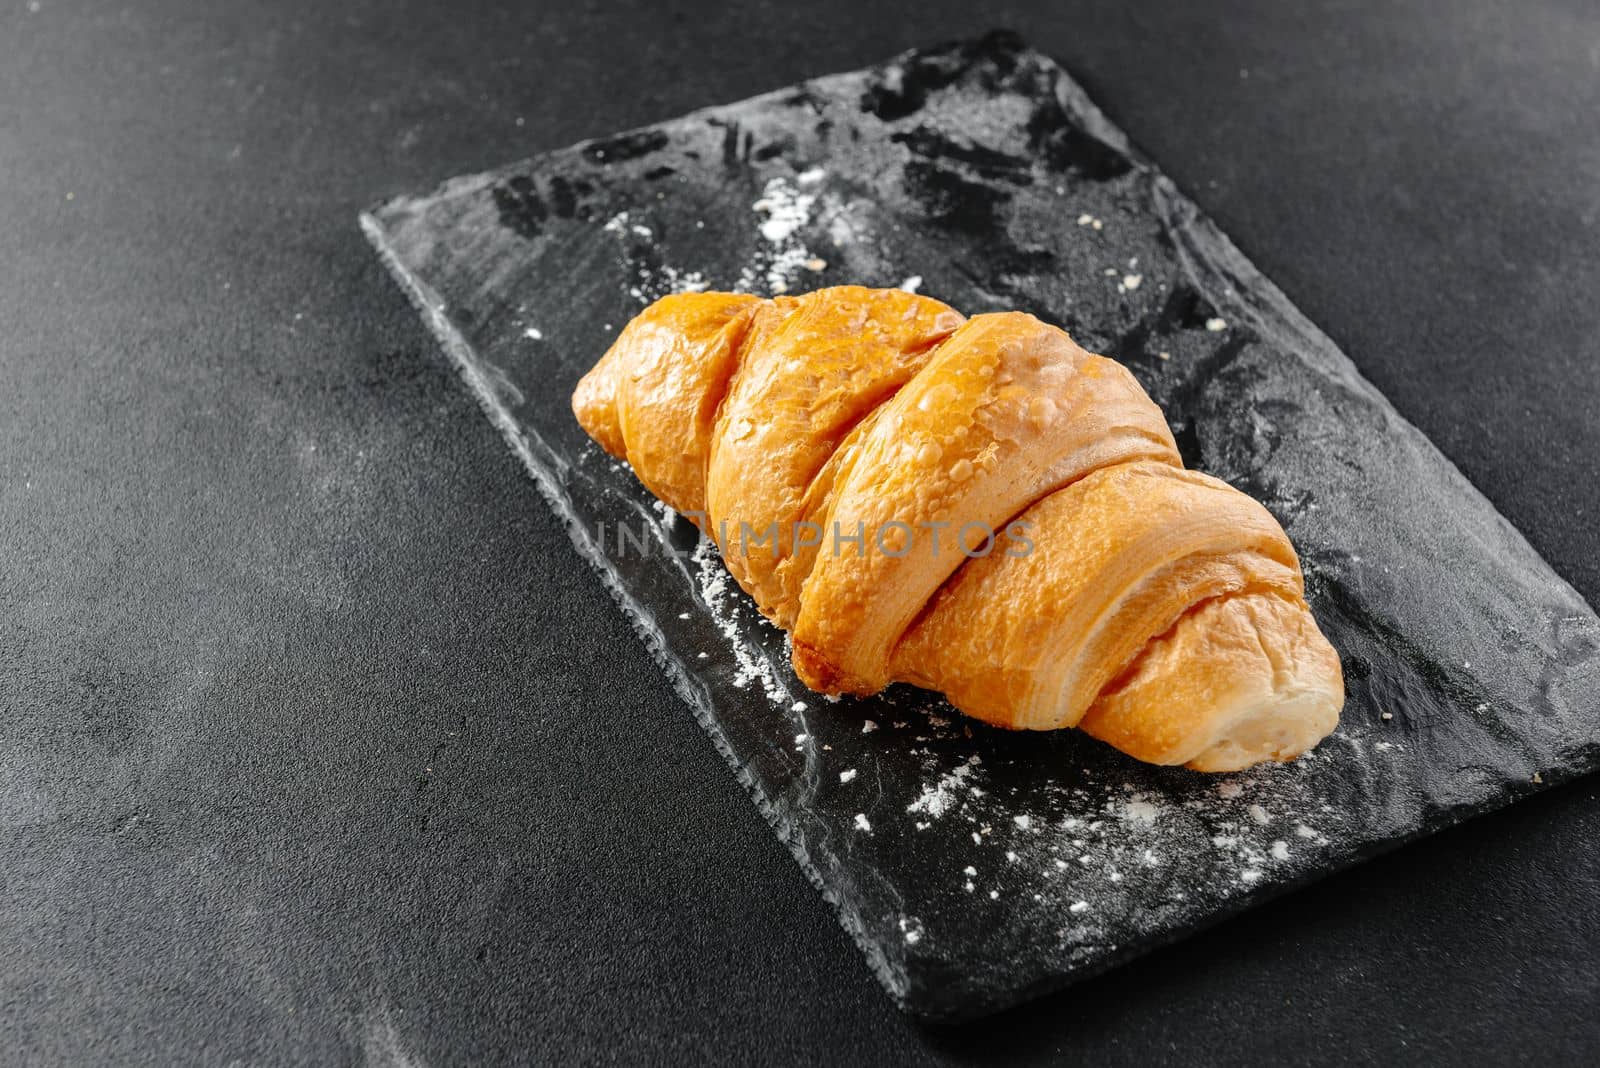 Large croissant on black background. Fresh and delicious French pastries, bakery concept, close-up image. Place to copy.